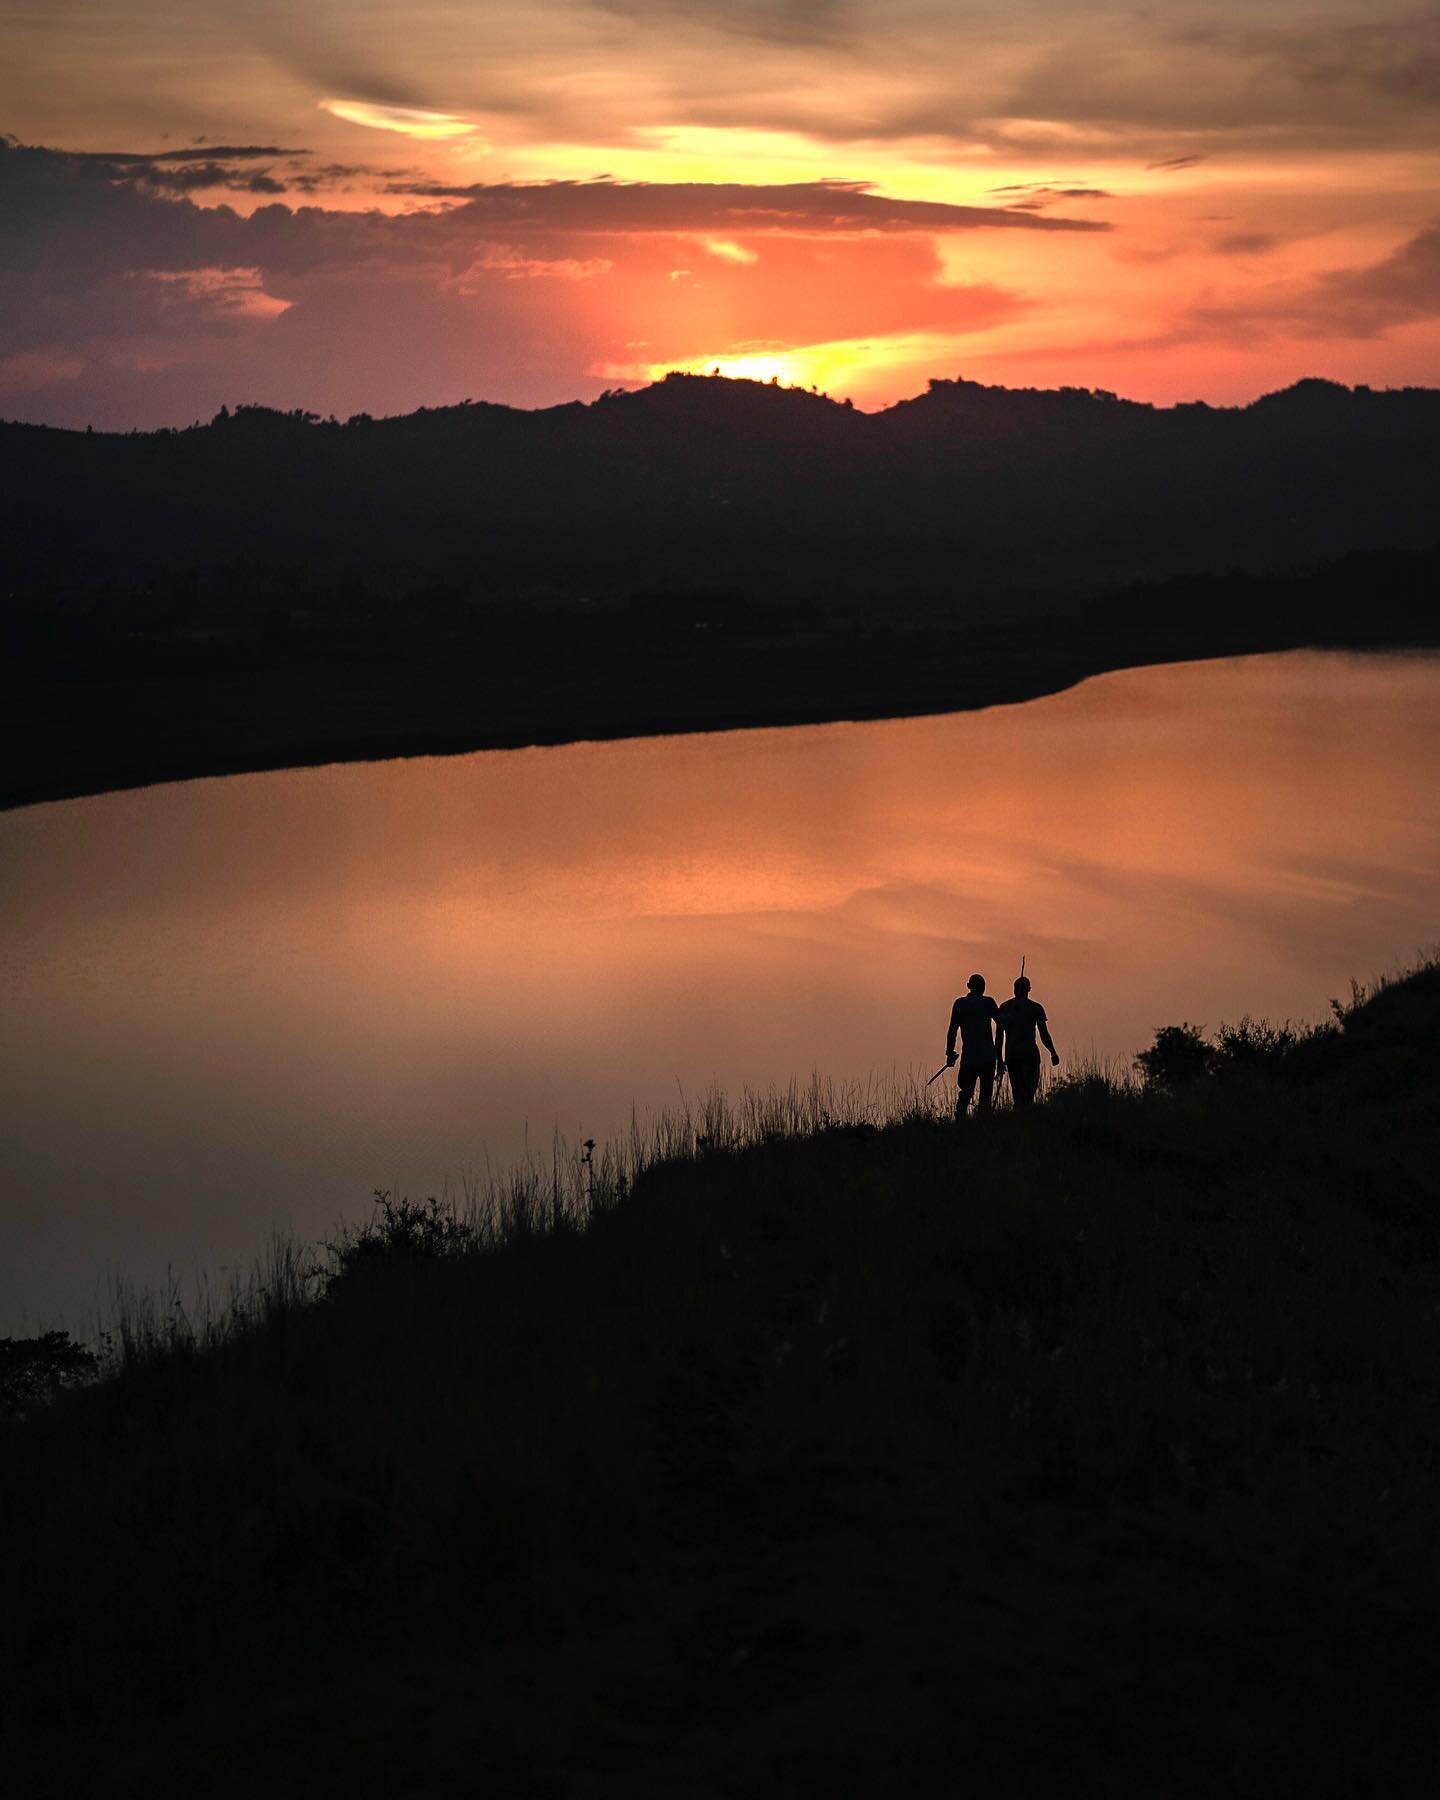 Sunset on the rim of an ancient volcano. The lake fills in an even older caldera. Virtually every peak and depression here was the result of some volcanic activity. 

#uganda #uganda🇺🇬 #eastafrica #africa #exploreafrica #ugandatravel